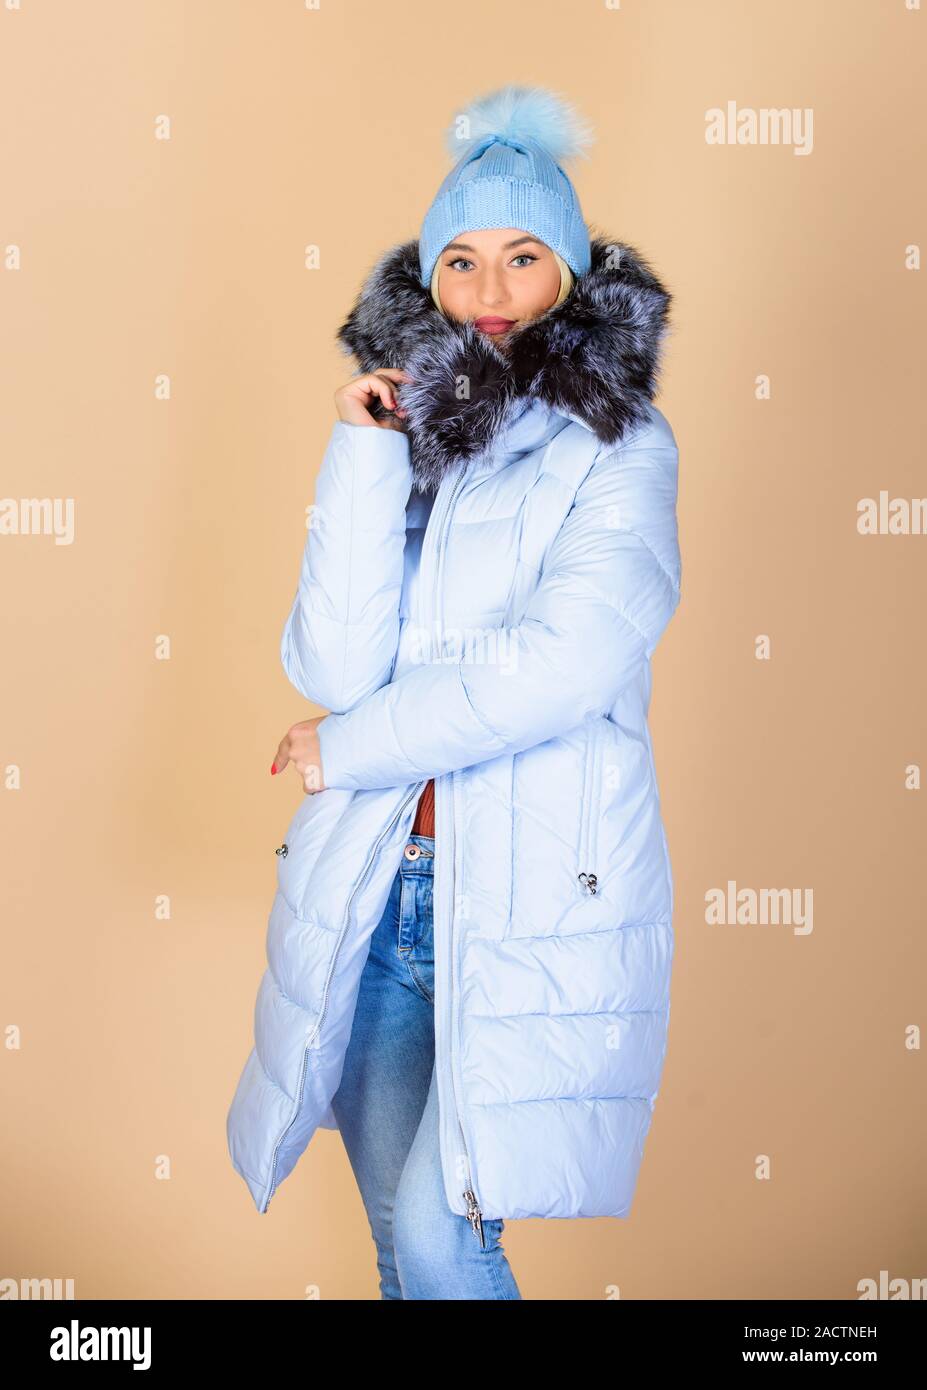 https://c8.alamy.com/comp/2ACTNEH/designed-for-your-comfort-fashion-girl-winter-clothes-fashion-trend-fashion-coat-warming-up-casual-winter-jacket-more-stylish-have-more-comfort-features-female-fashion-clothes-shop-buy-online-2ACTNEH.jpg